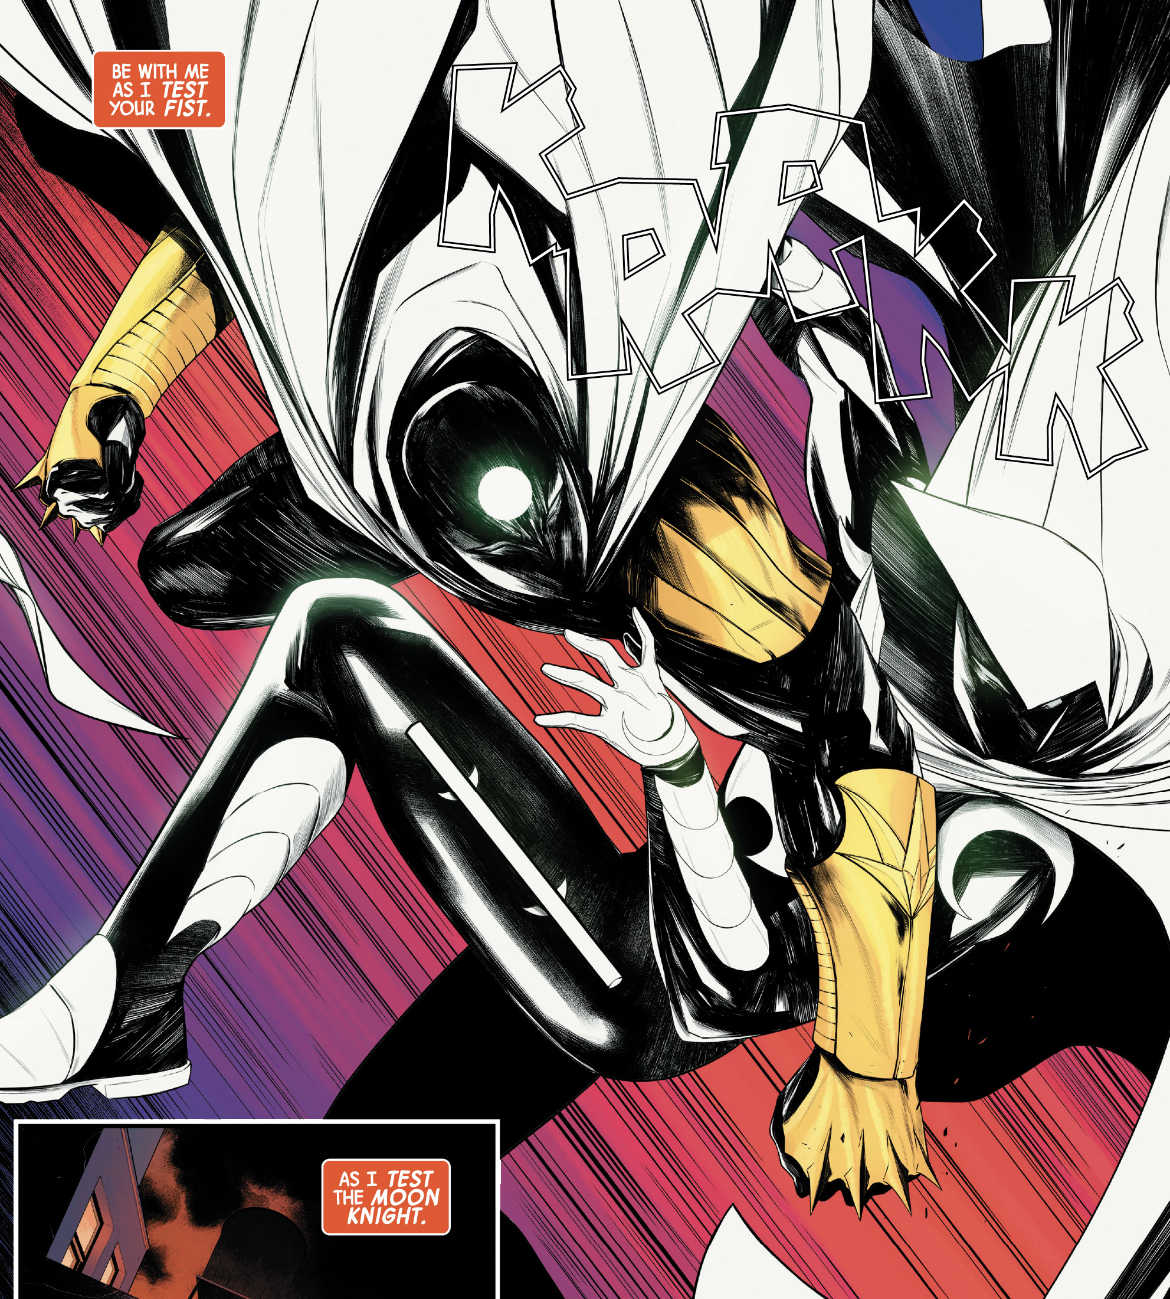 Black, white, red, yellow fight scene between Dr. Badr and Moon Knight